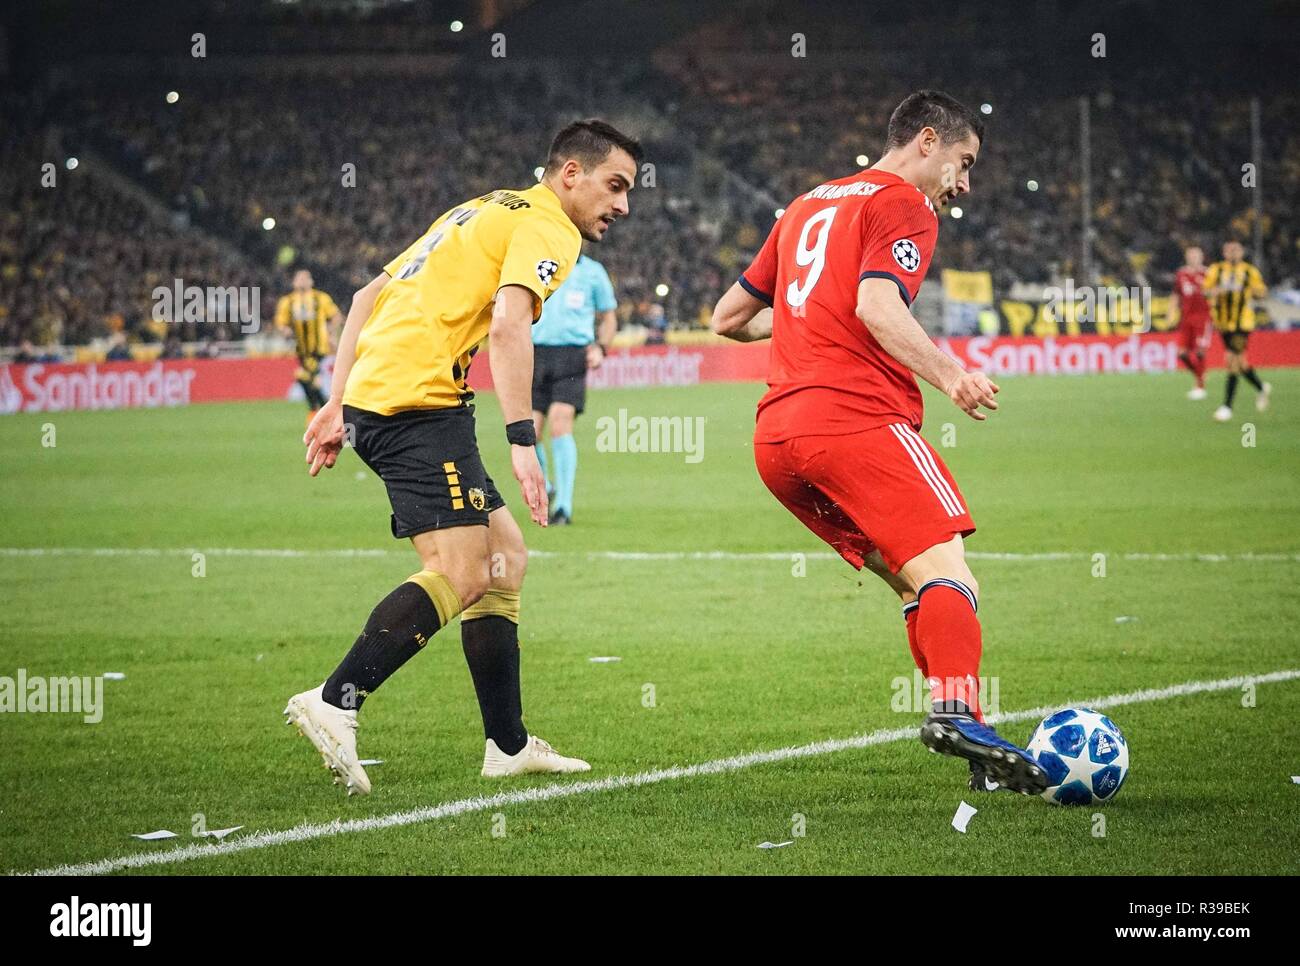 Robert Lewandowski of Bayern Munich and Anastasios Bakasetas of AEK FC are  seen in action during the Group E match of the UEFA Champions League  between AEK FC and Bayern Munich FC